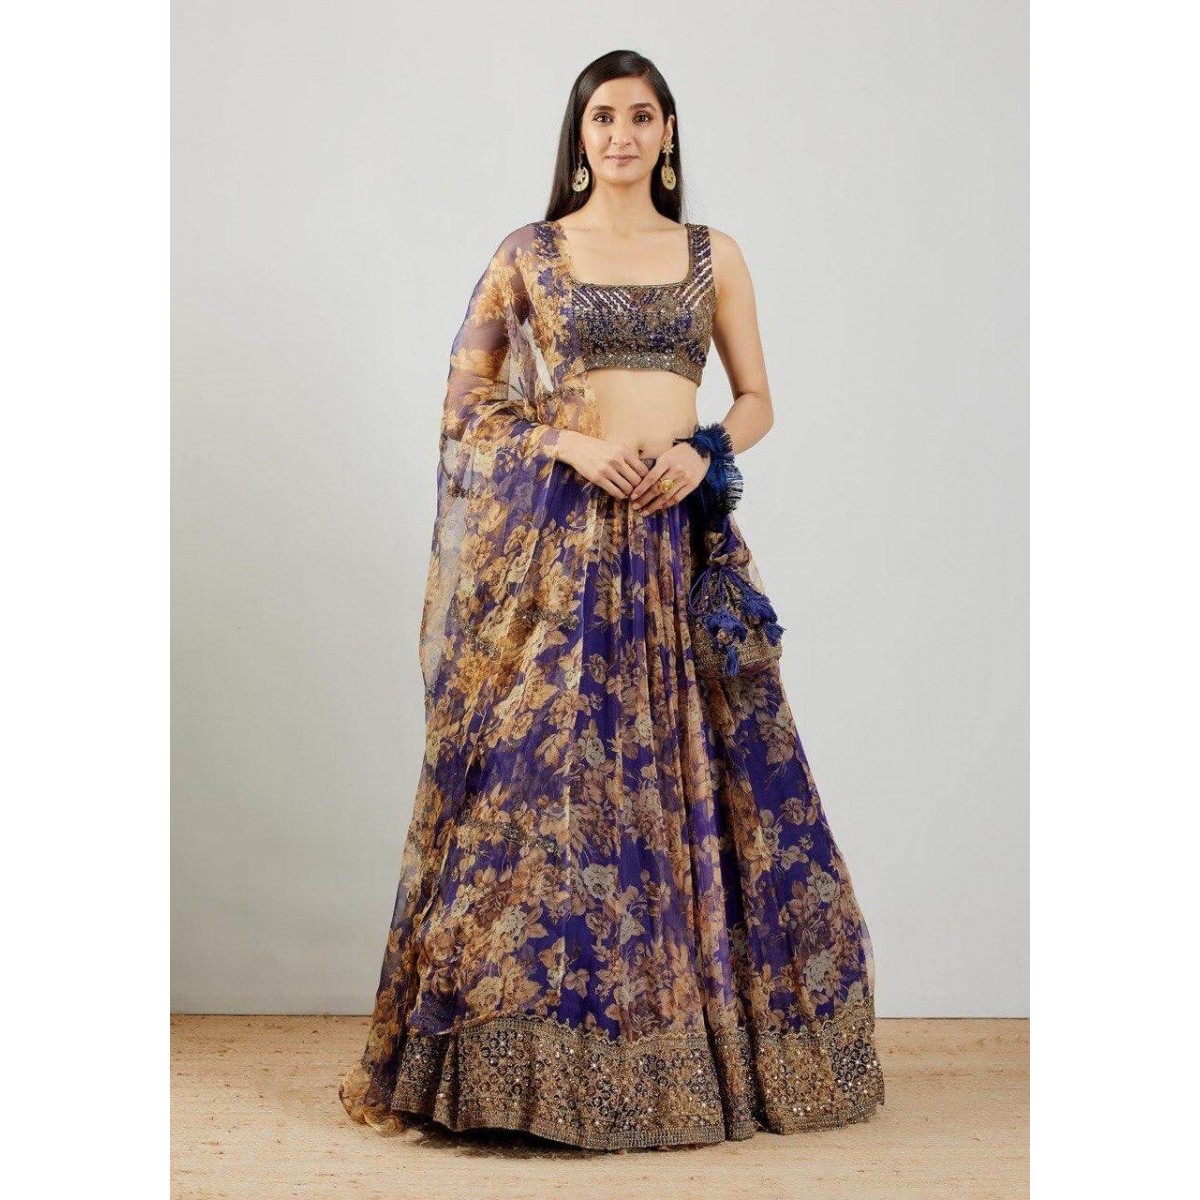 Buy Can-Can Skirt for Lehenga (34, Gold) at Amazon.in